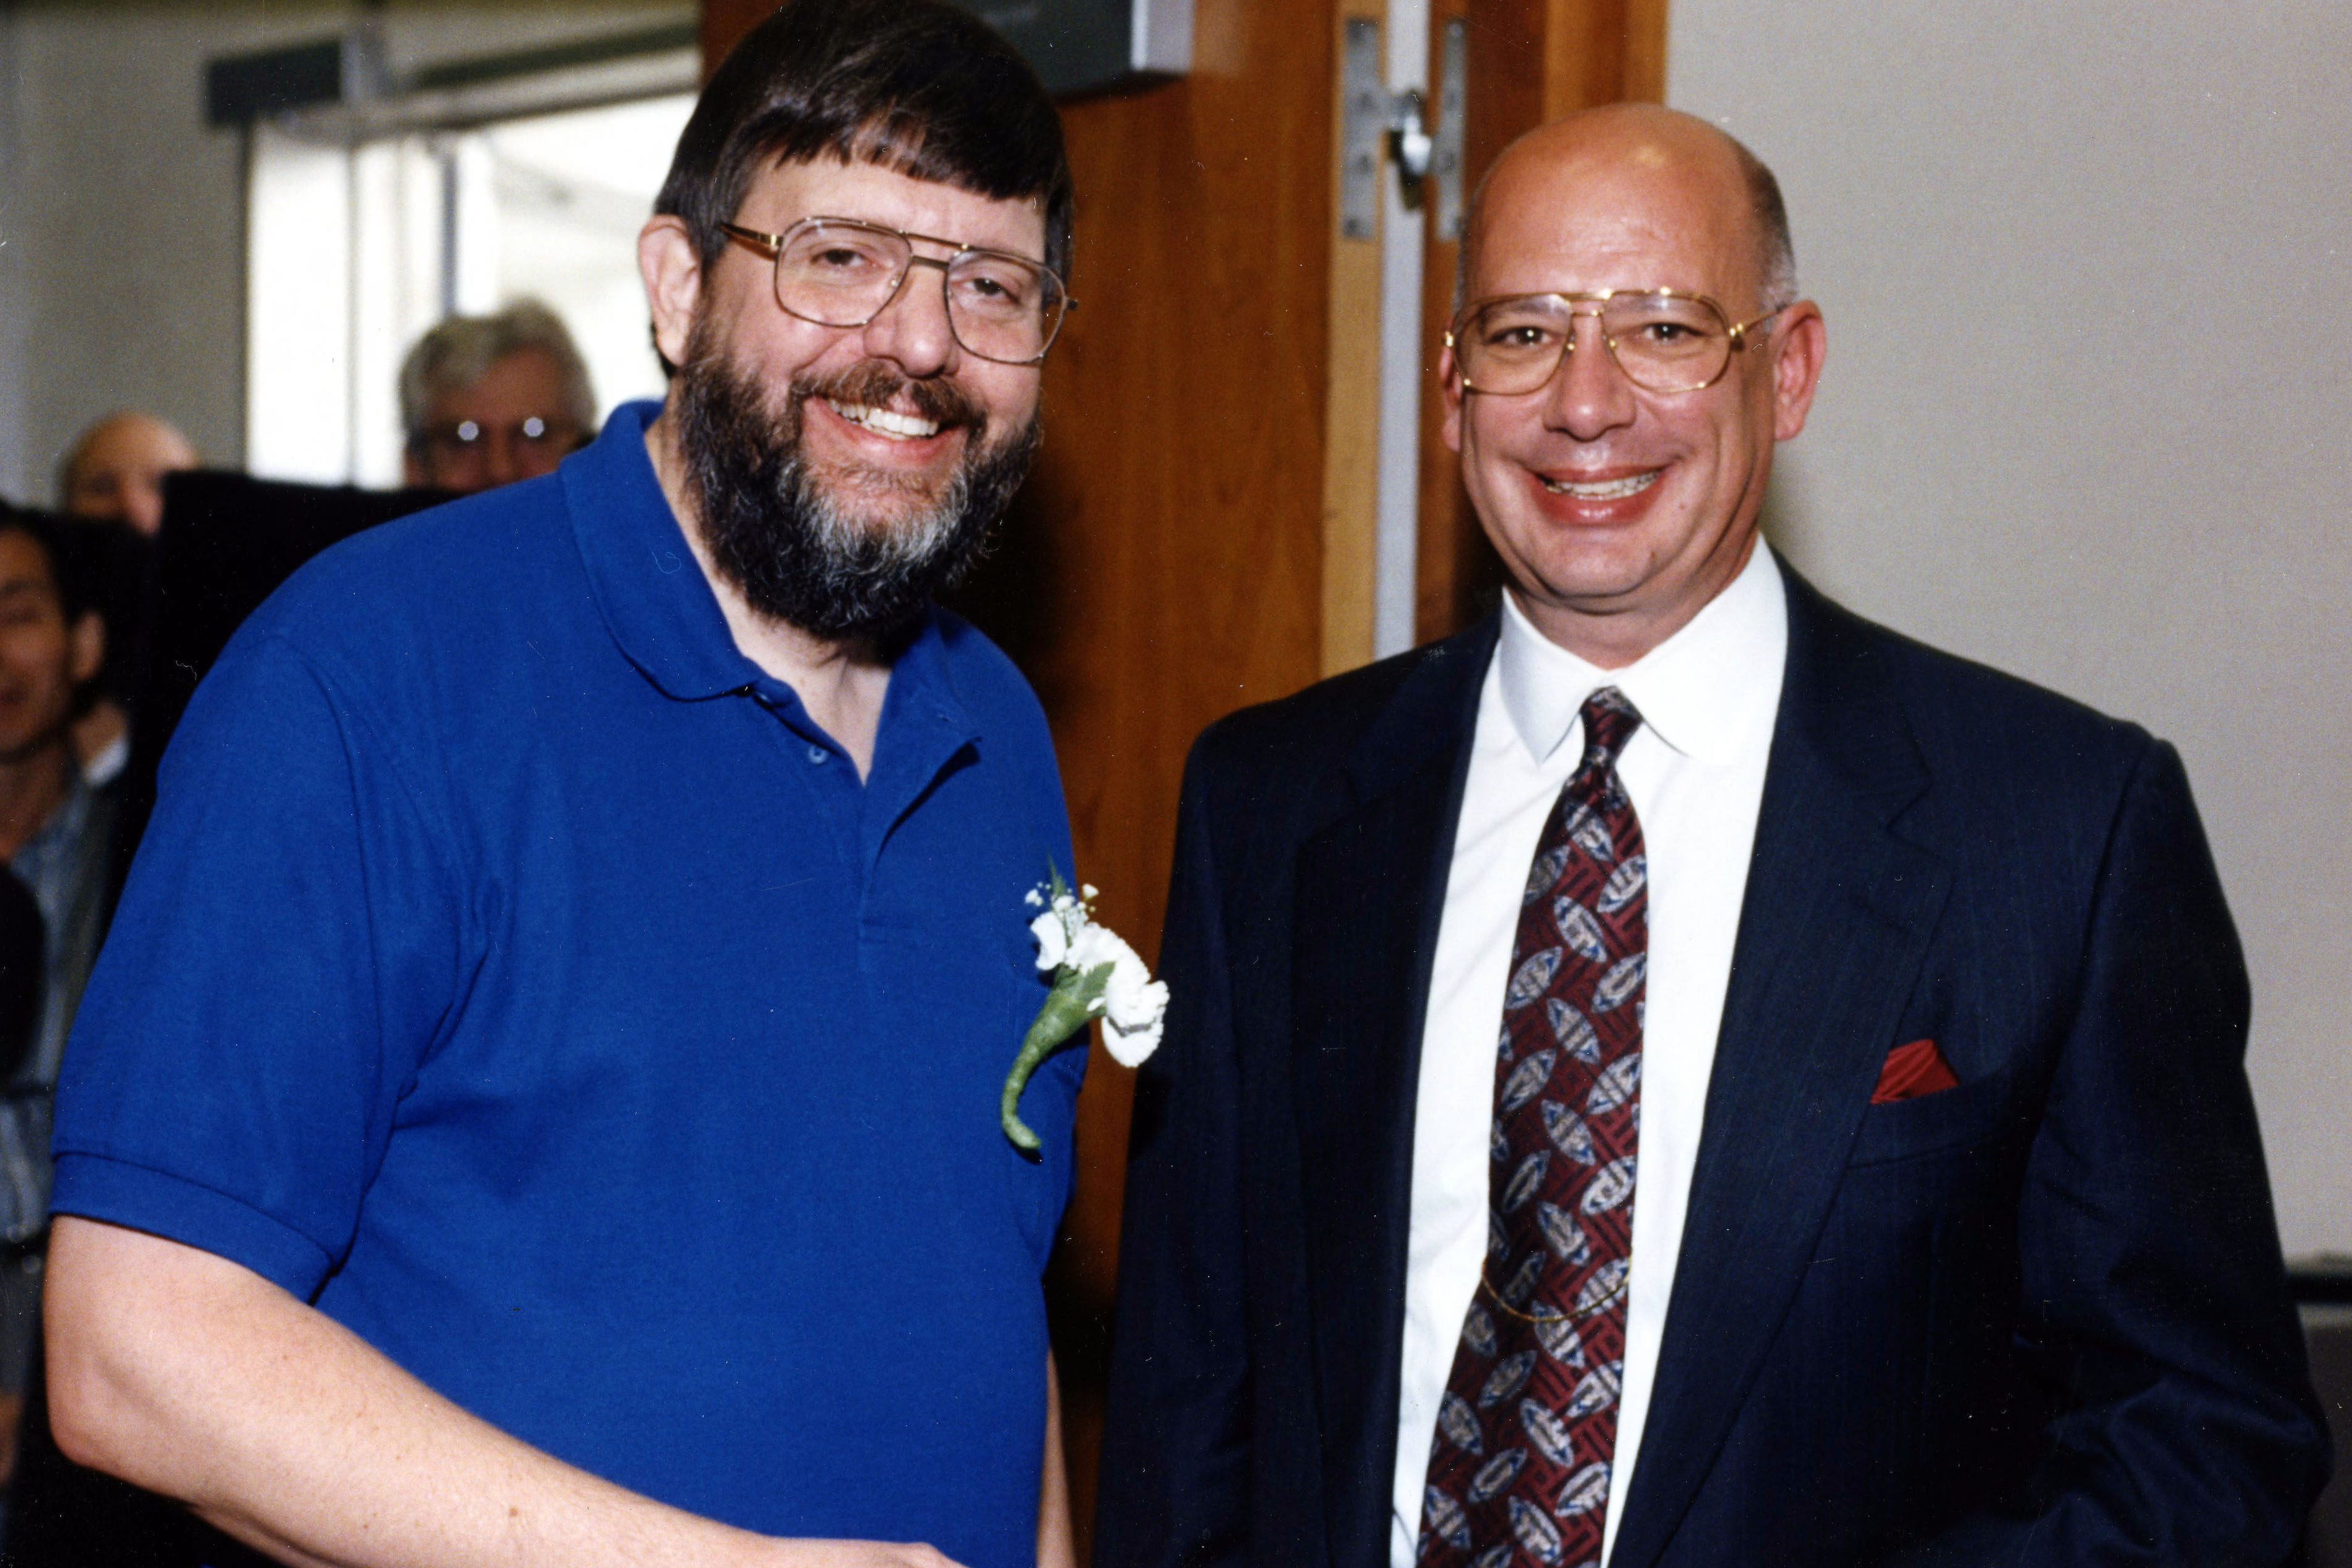 Two men standing side by side smiling, the one on the left with a single white flower pinned to his polo shirt, the one on the right in a suit and tie.